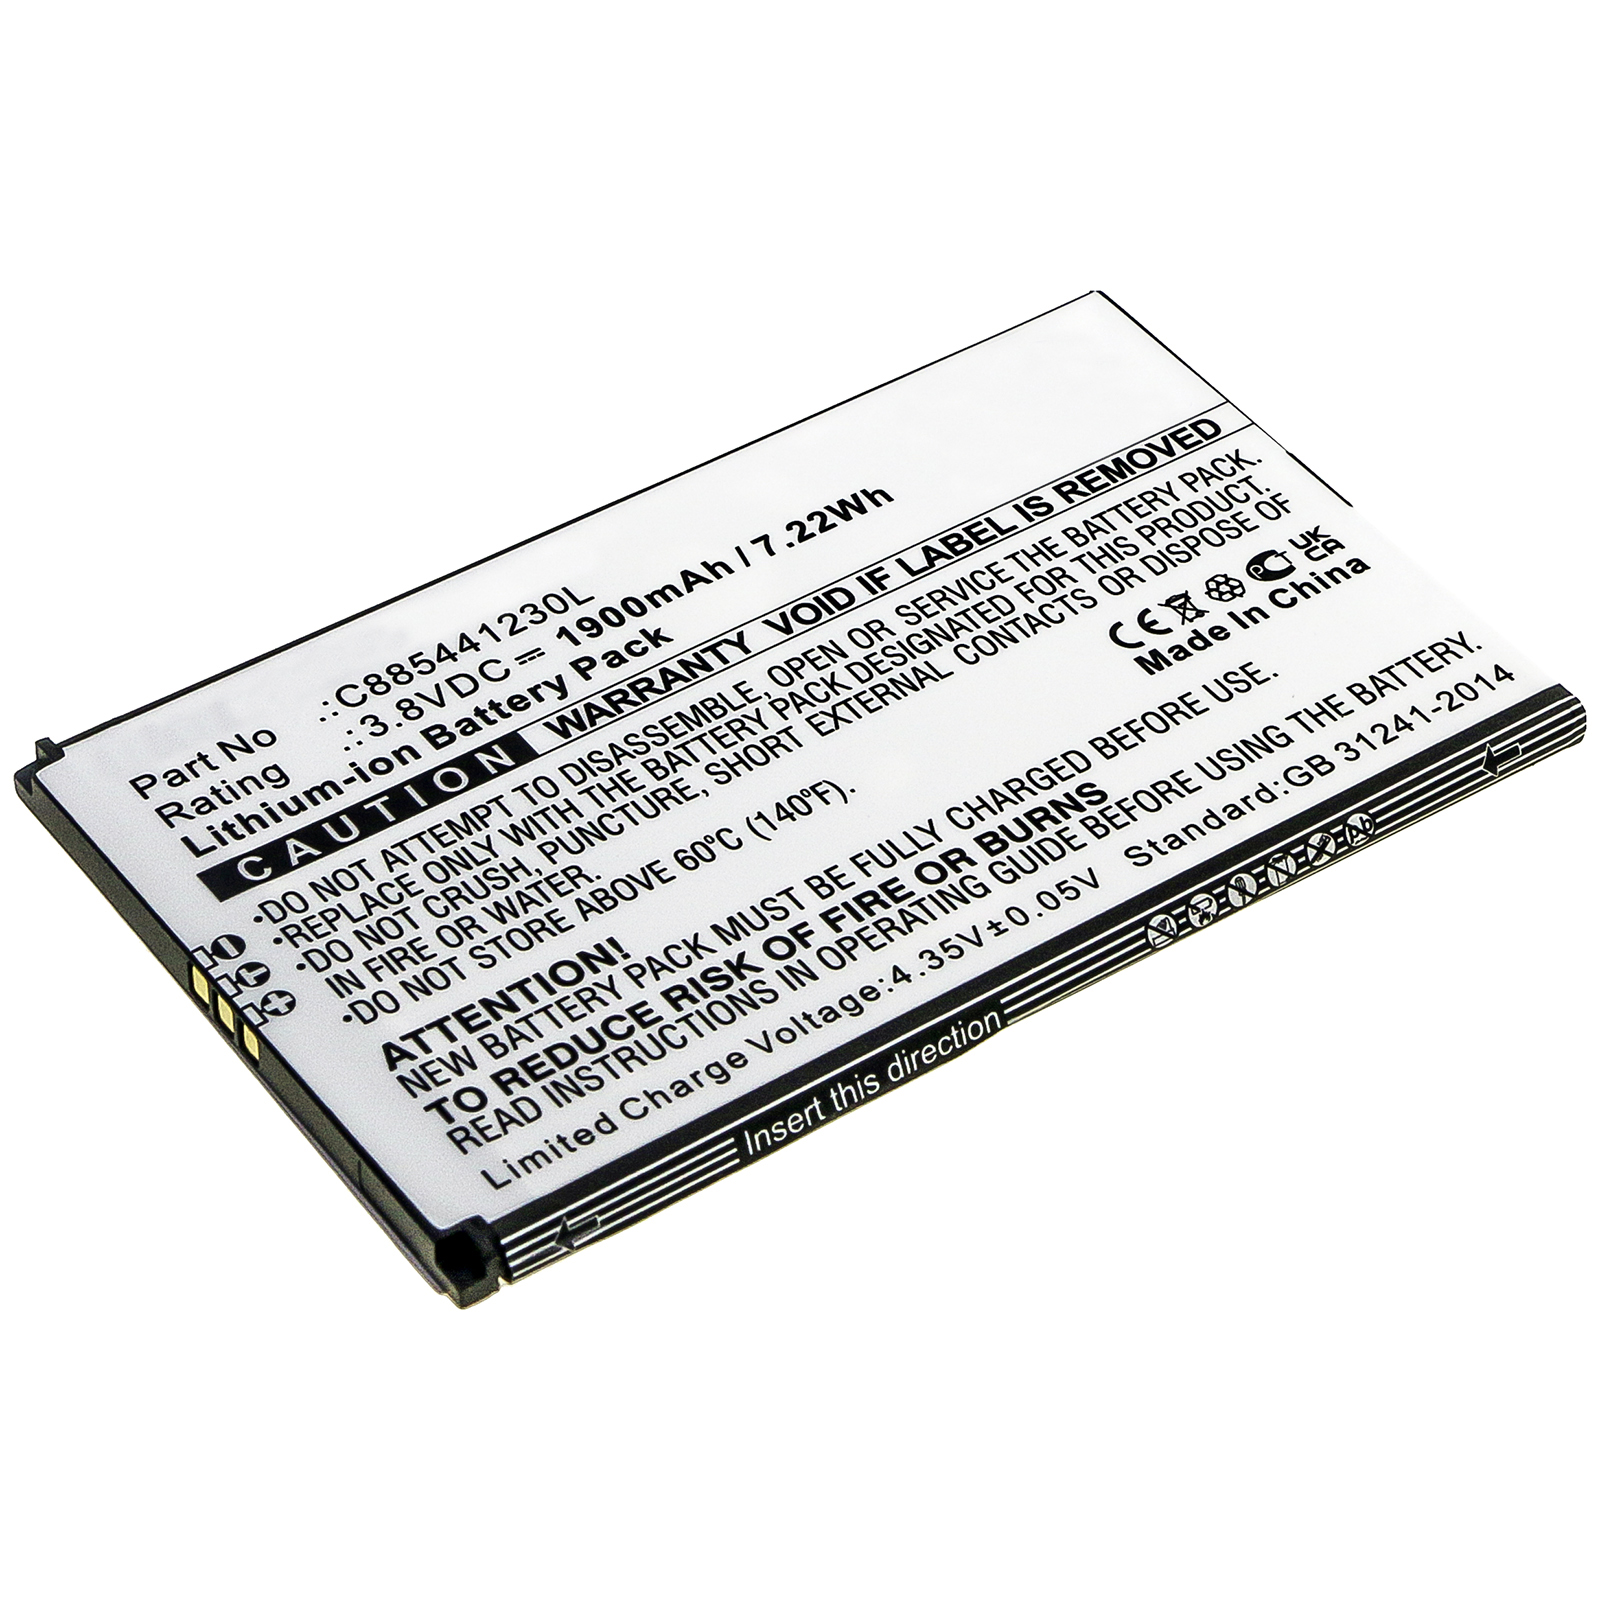 Synergy Digital Cell Phone Battery, Compatible with BLU C885441230L Cell Phone Battery (Li-ion, 3.8V, 1900mAh)